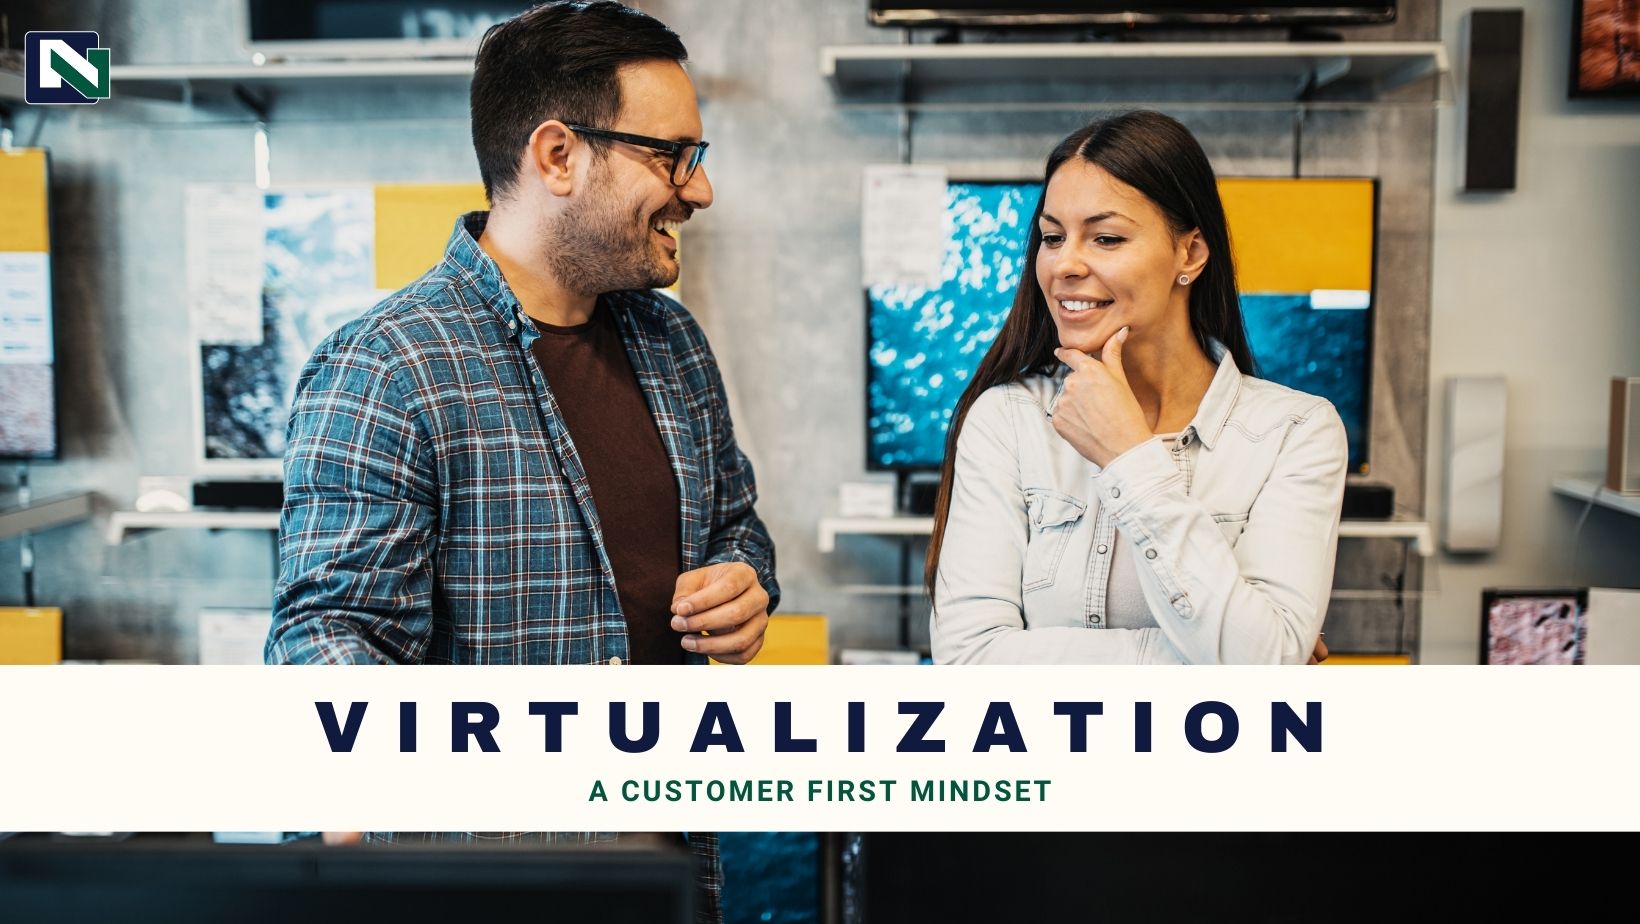 Virtualization is a customer first mindset